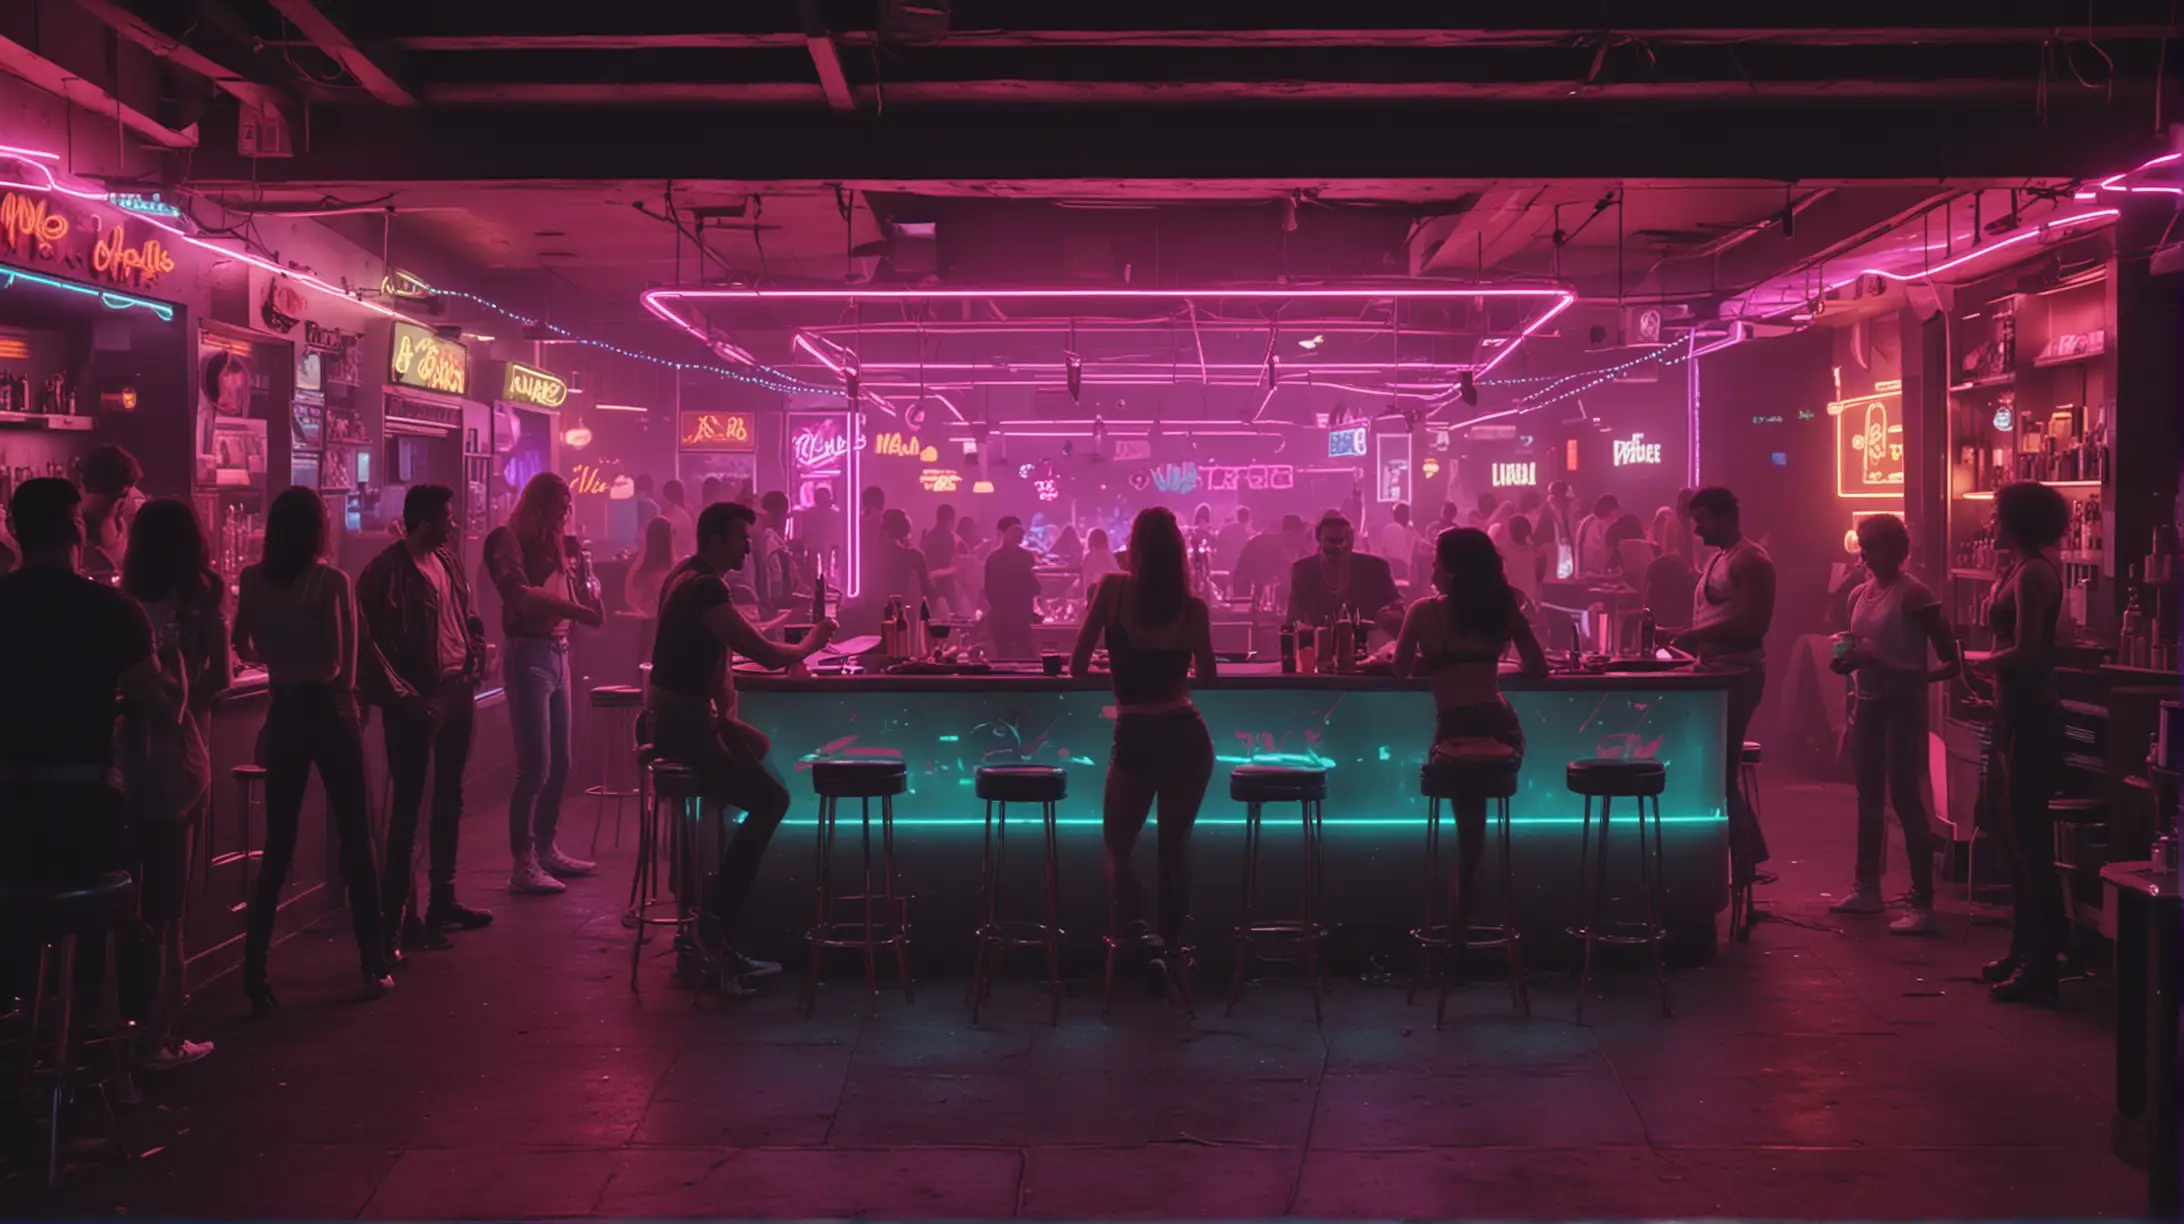 an 80s neon environment with lots of people enjoying a cool bar